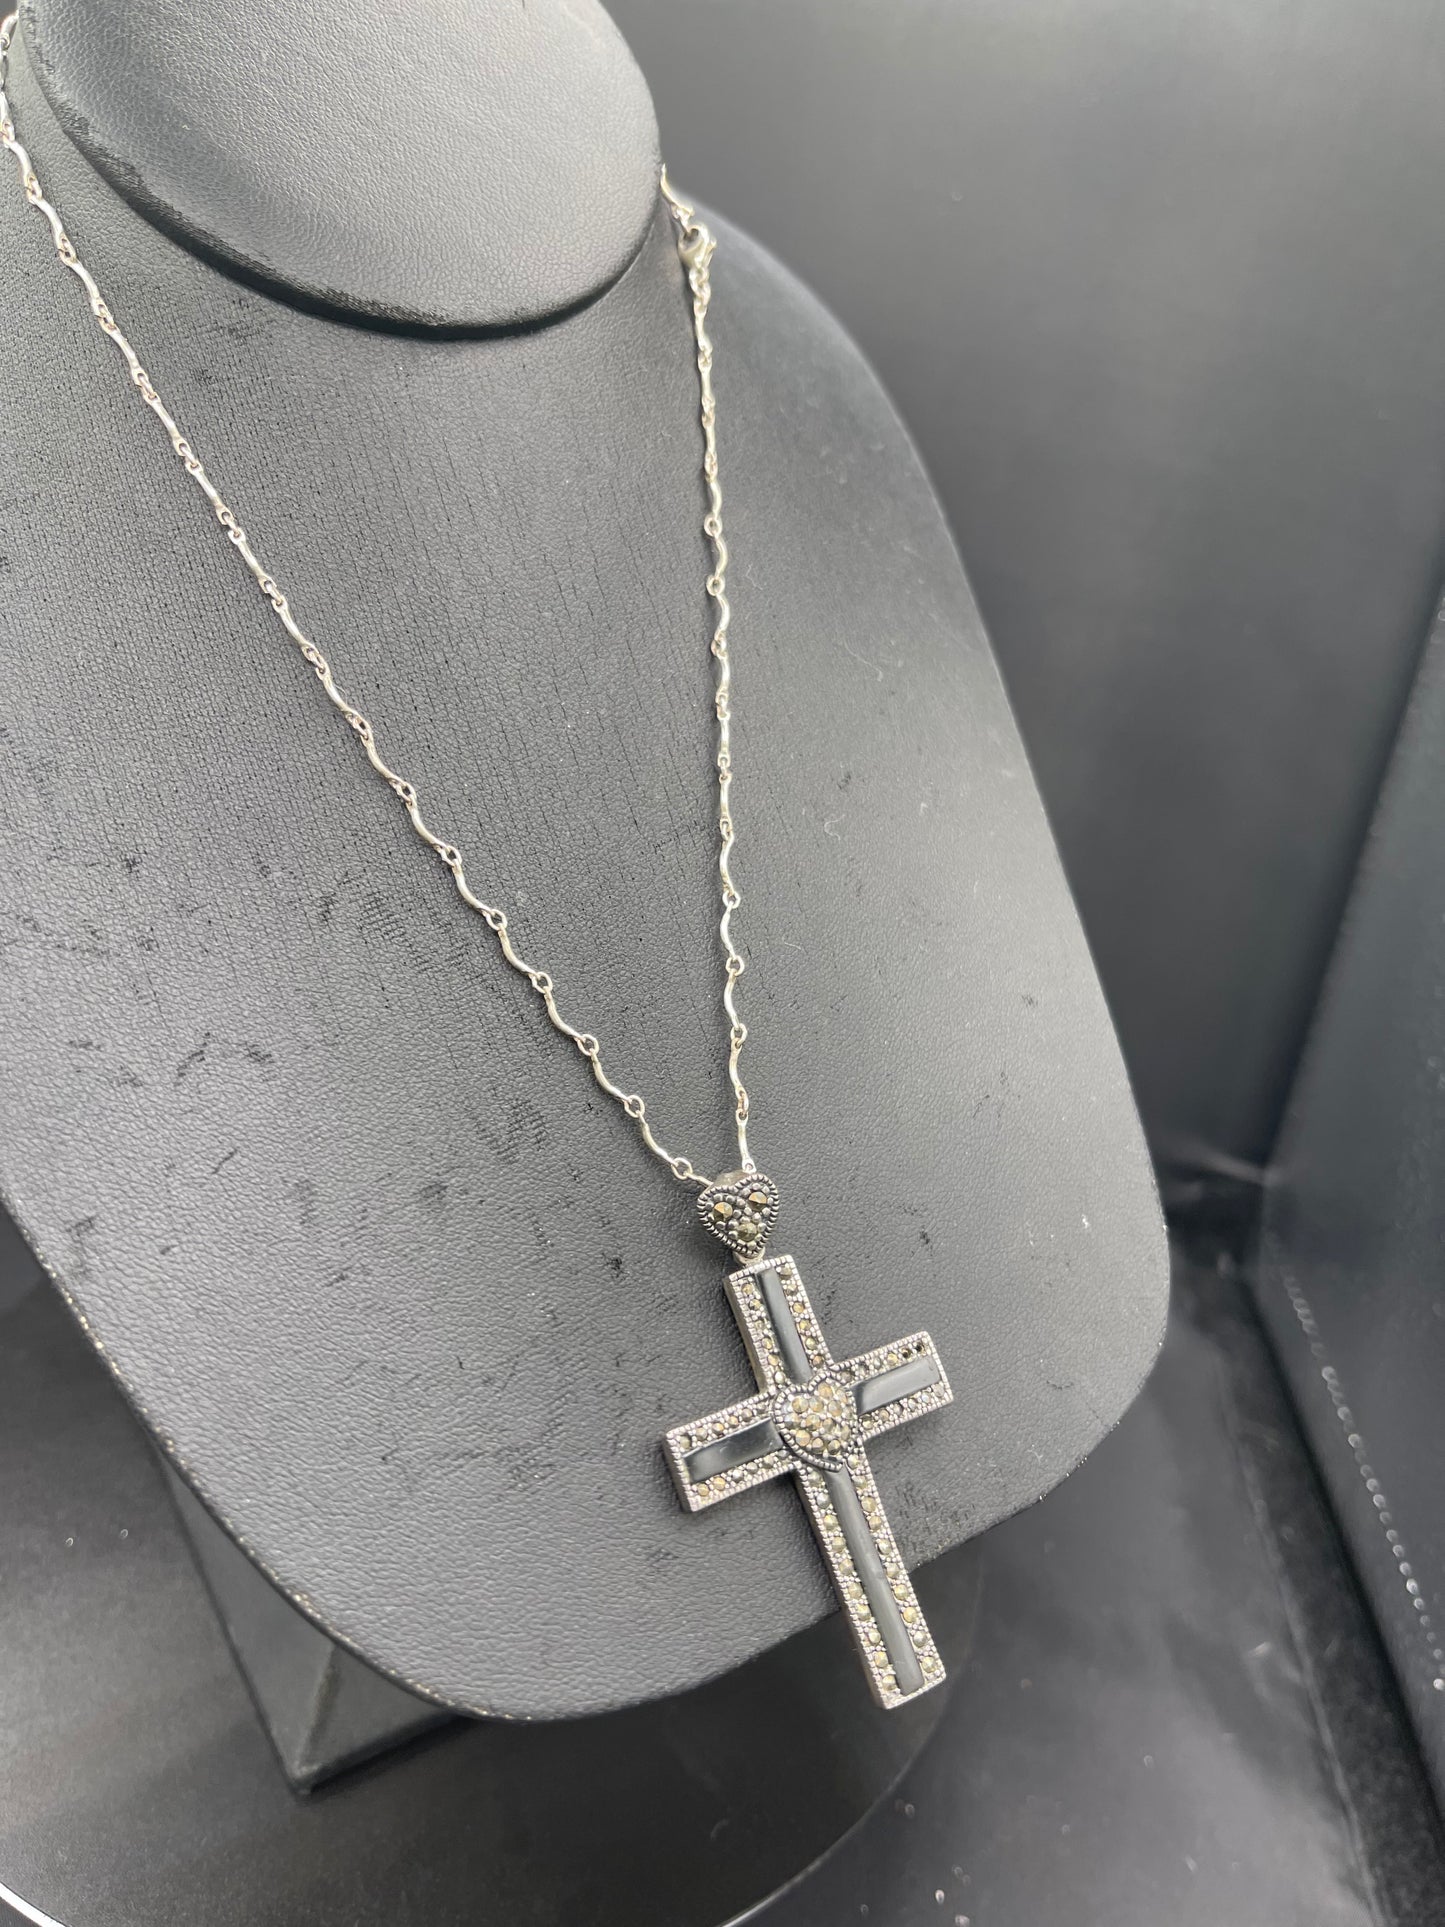 Natural Black Onyx & Marcasite Sterling Silver Cross Pendant And Necklace